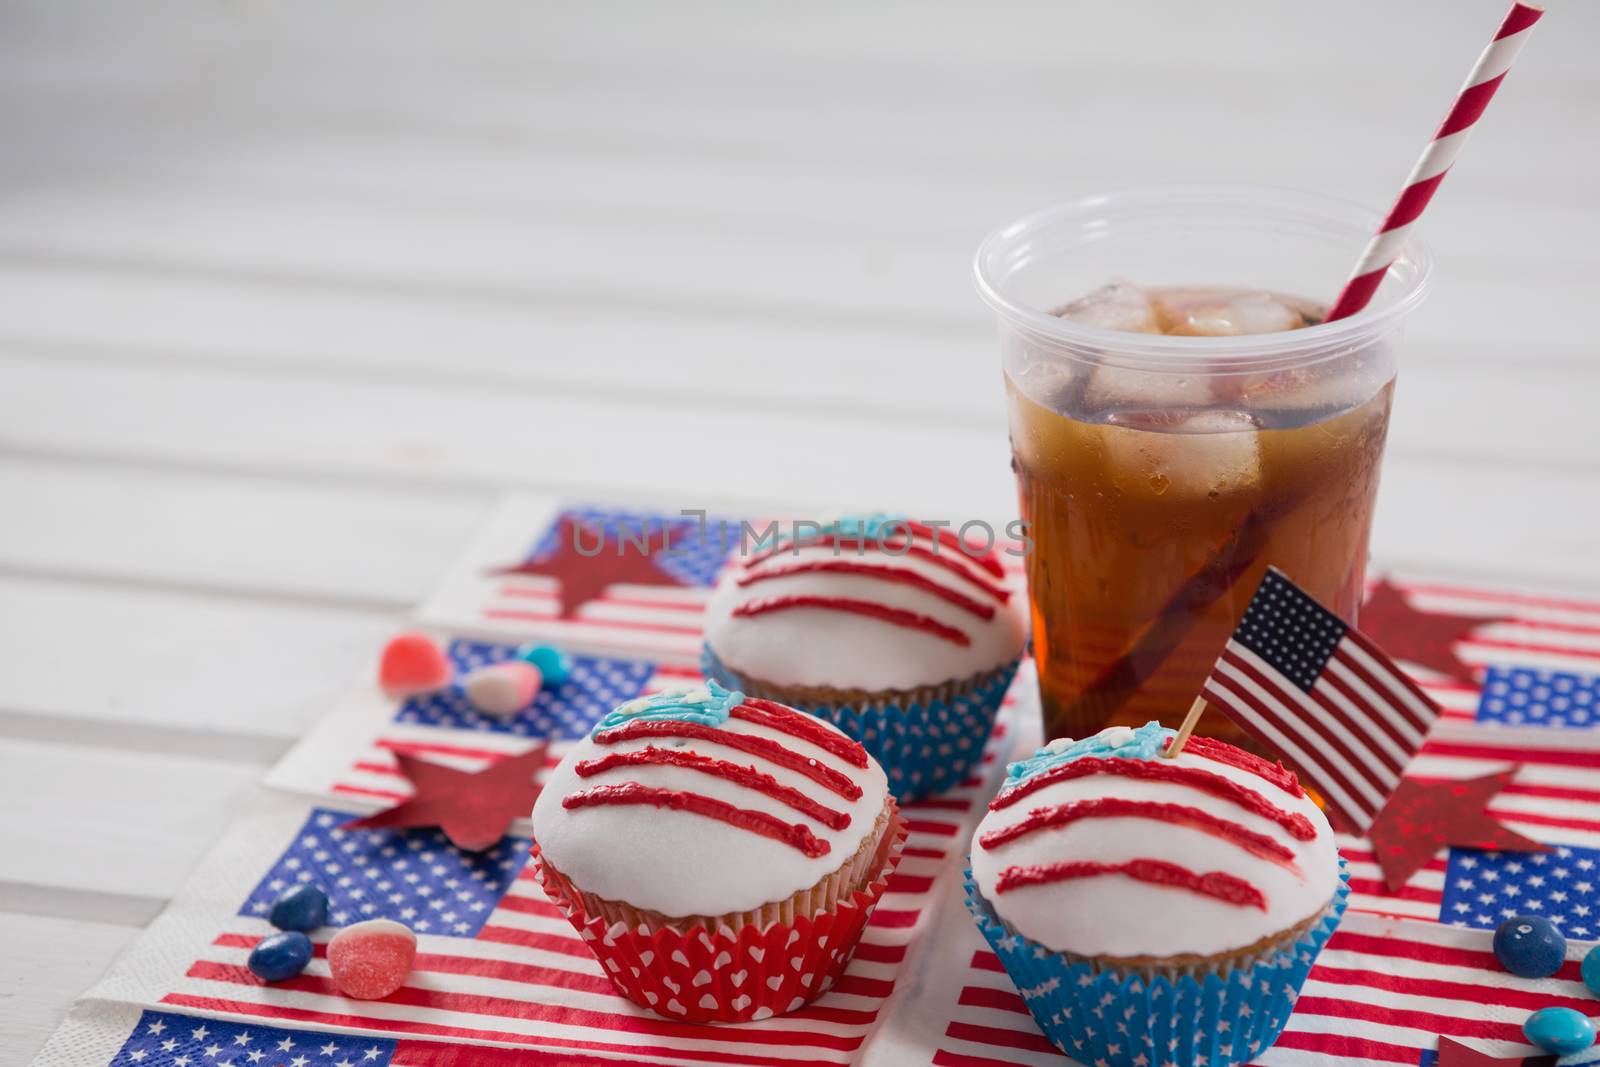 Decorated cupcakes and cold drink with 4th july theme on table